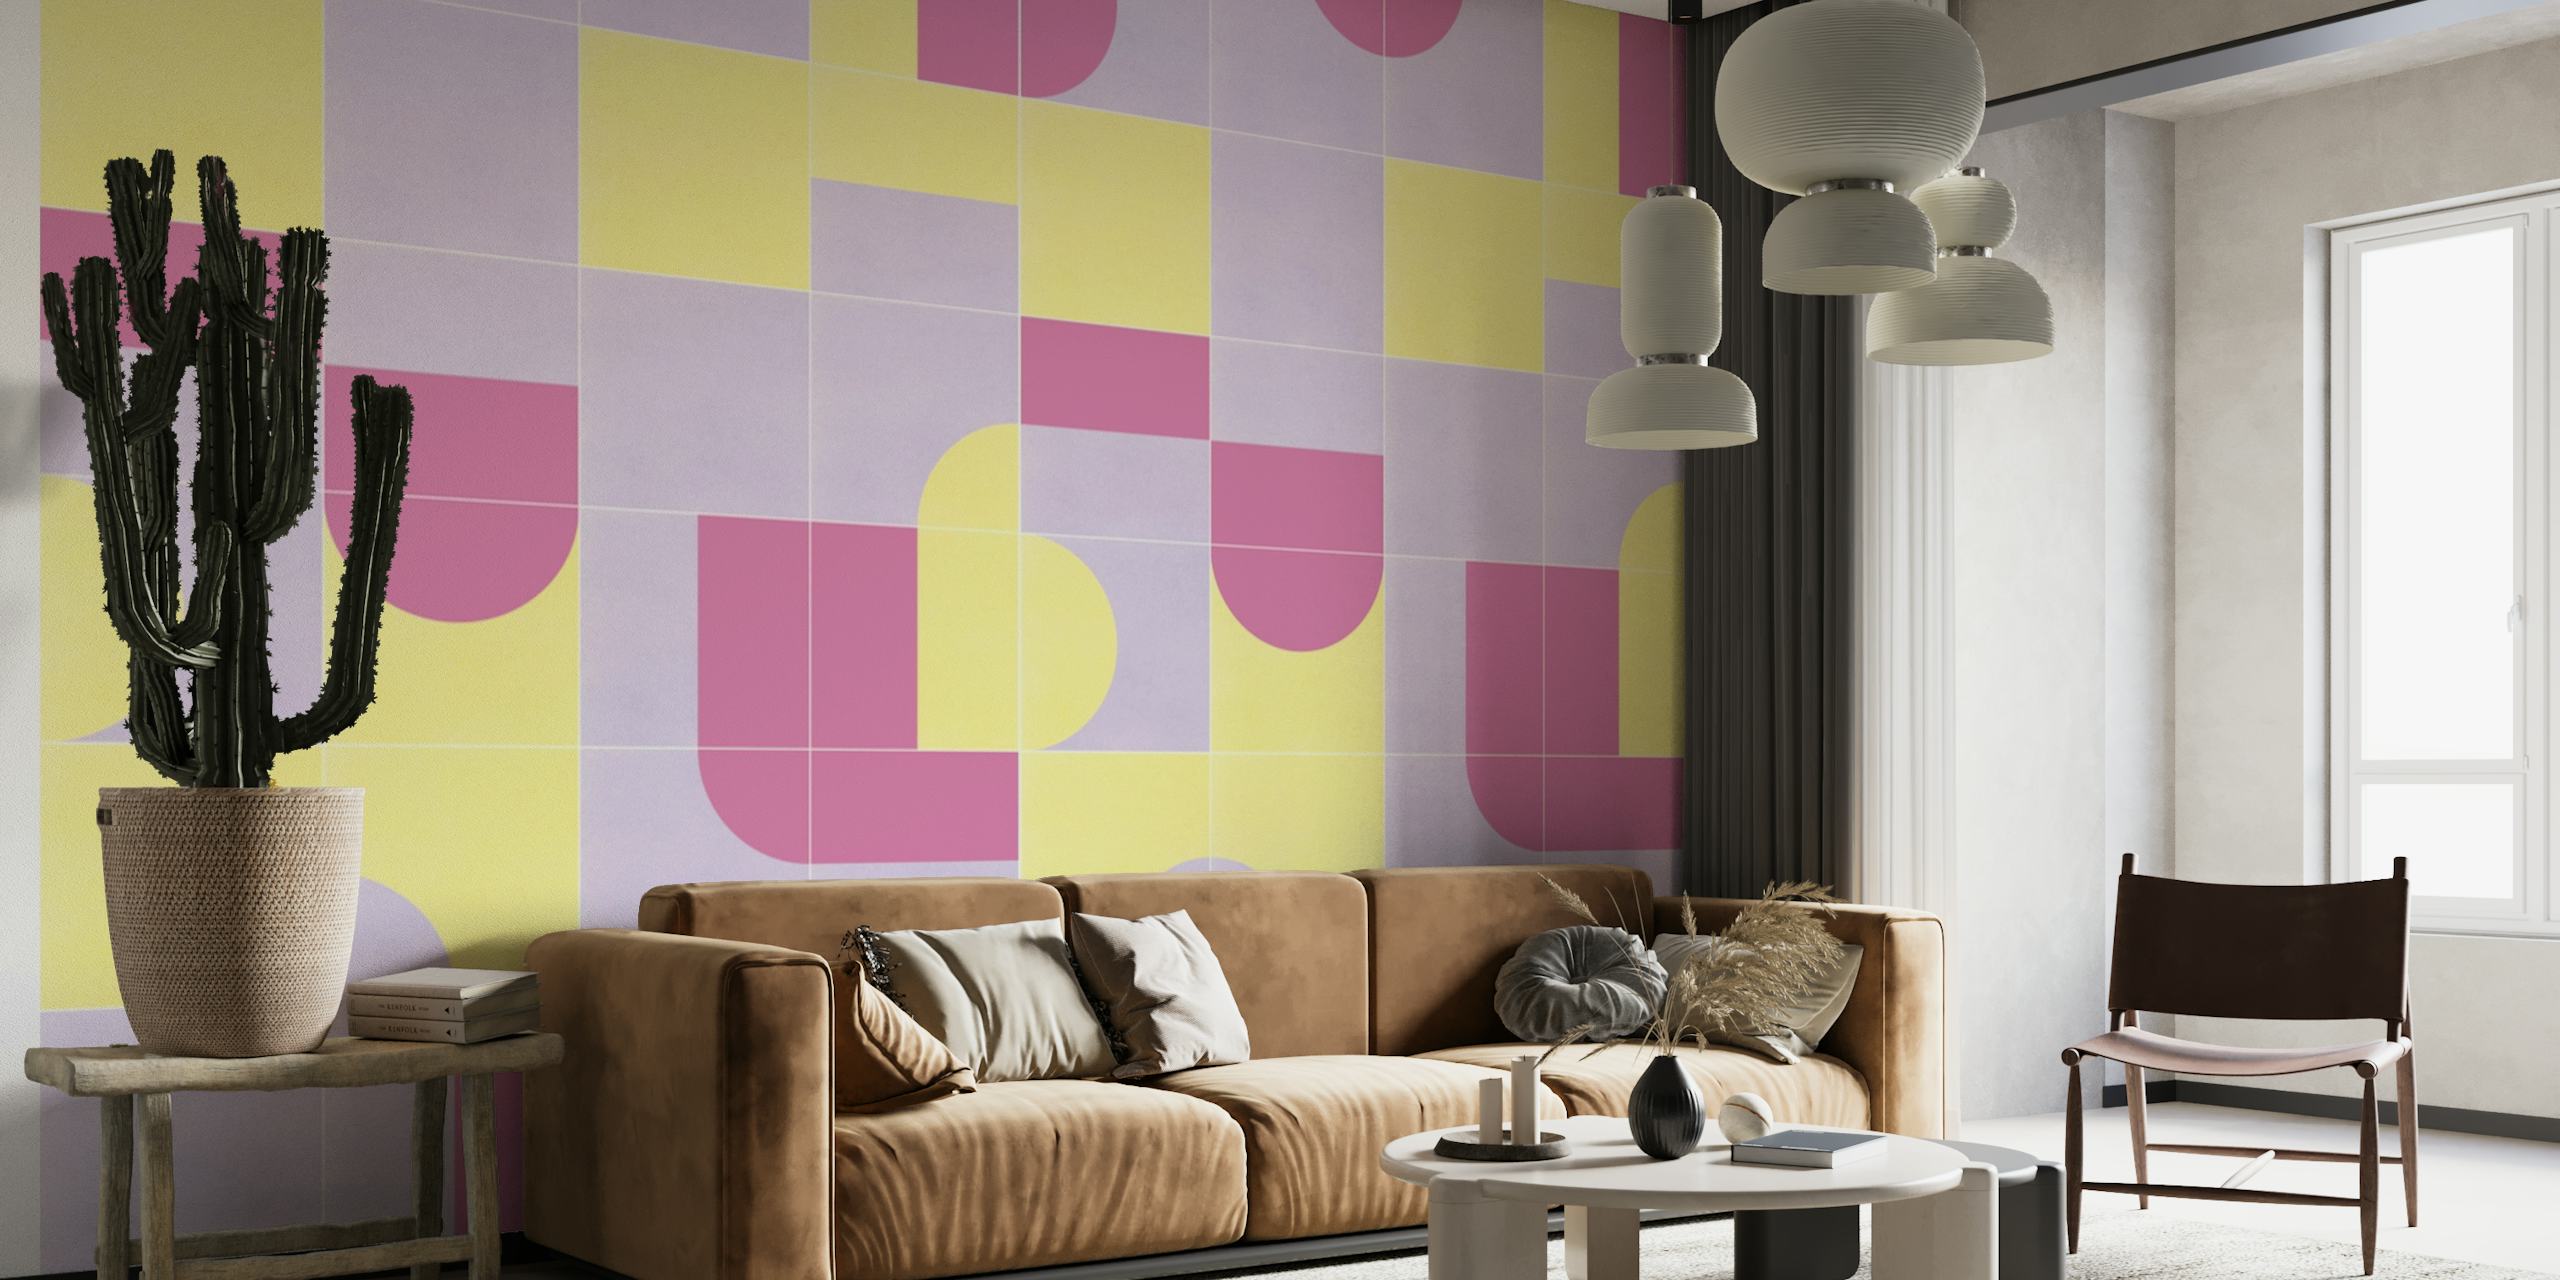 Vintage-style pastel geometric shapes wall mural